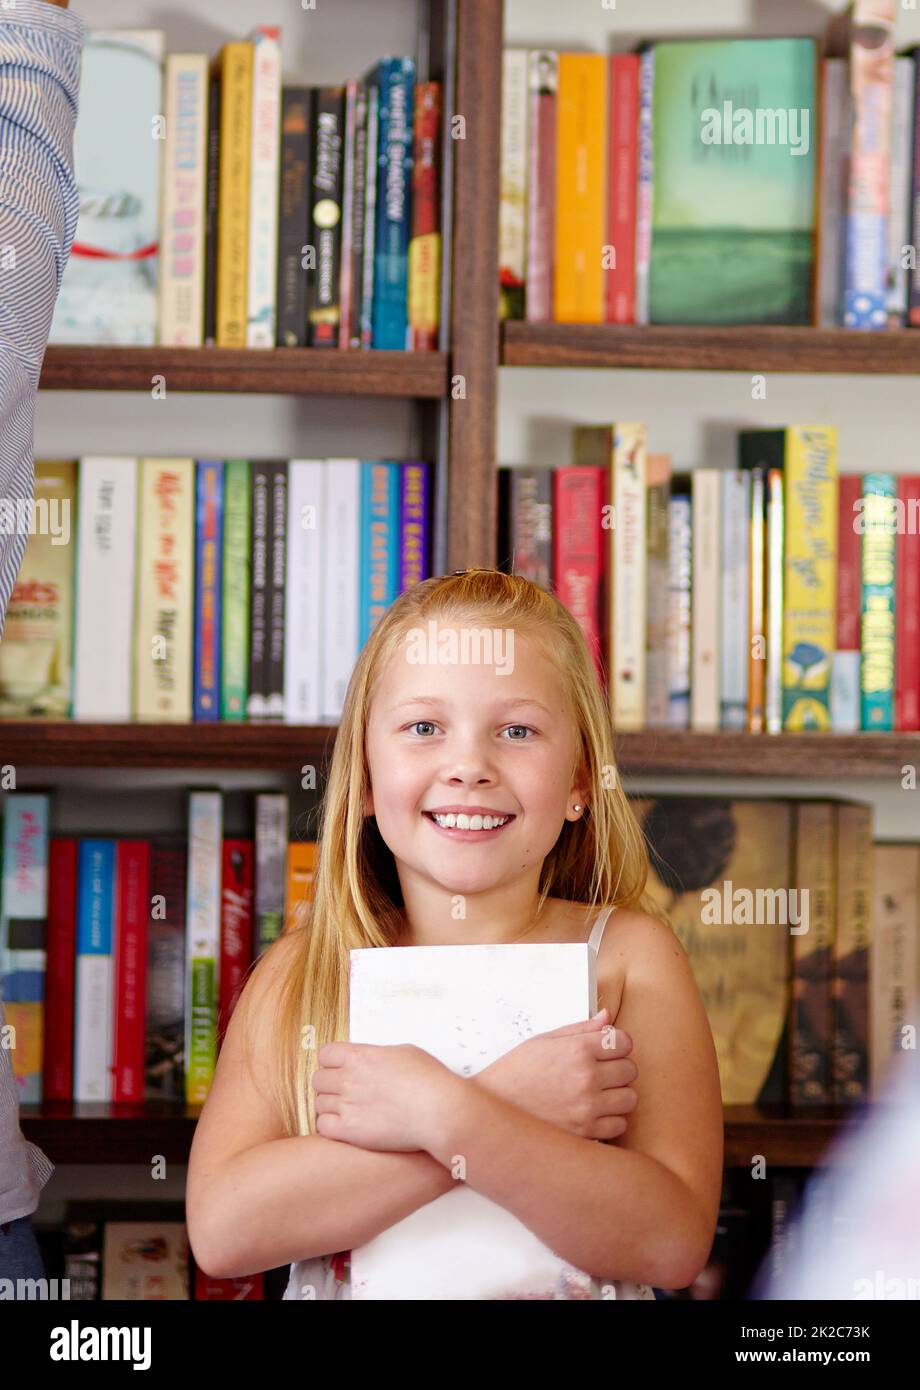 I love books. A cute young girl clutching her book in a library. Stock Photo